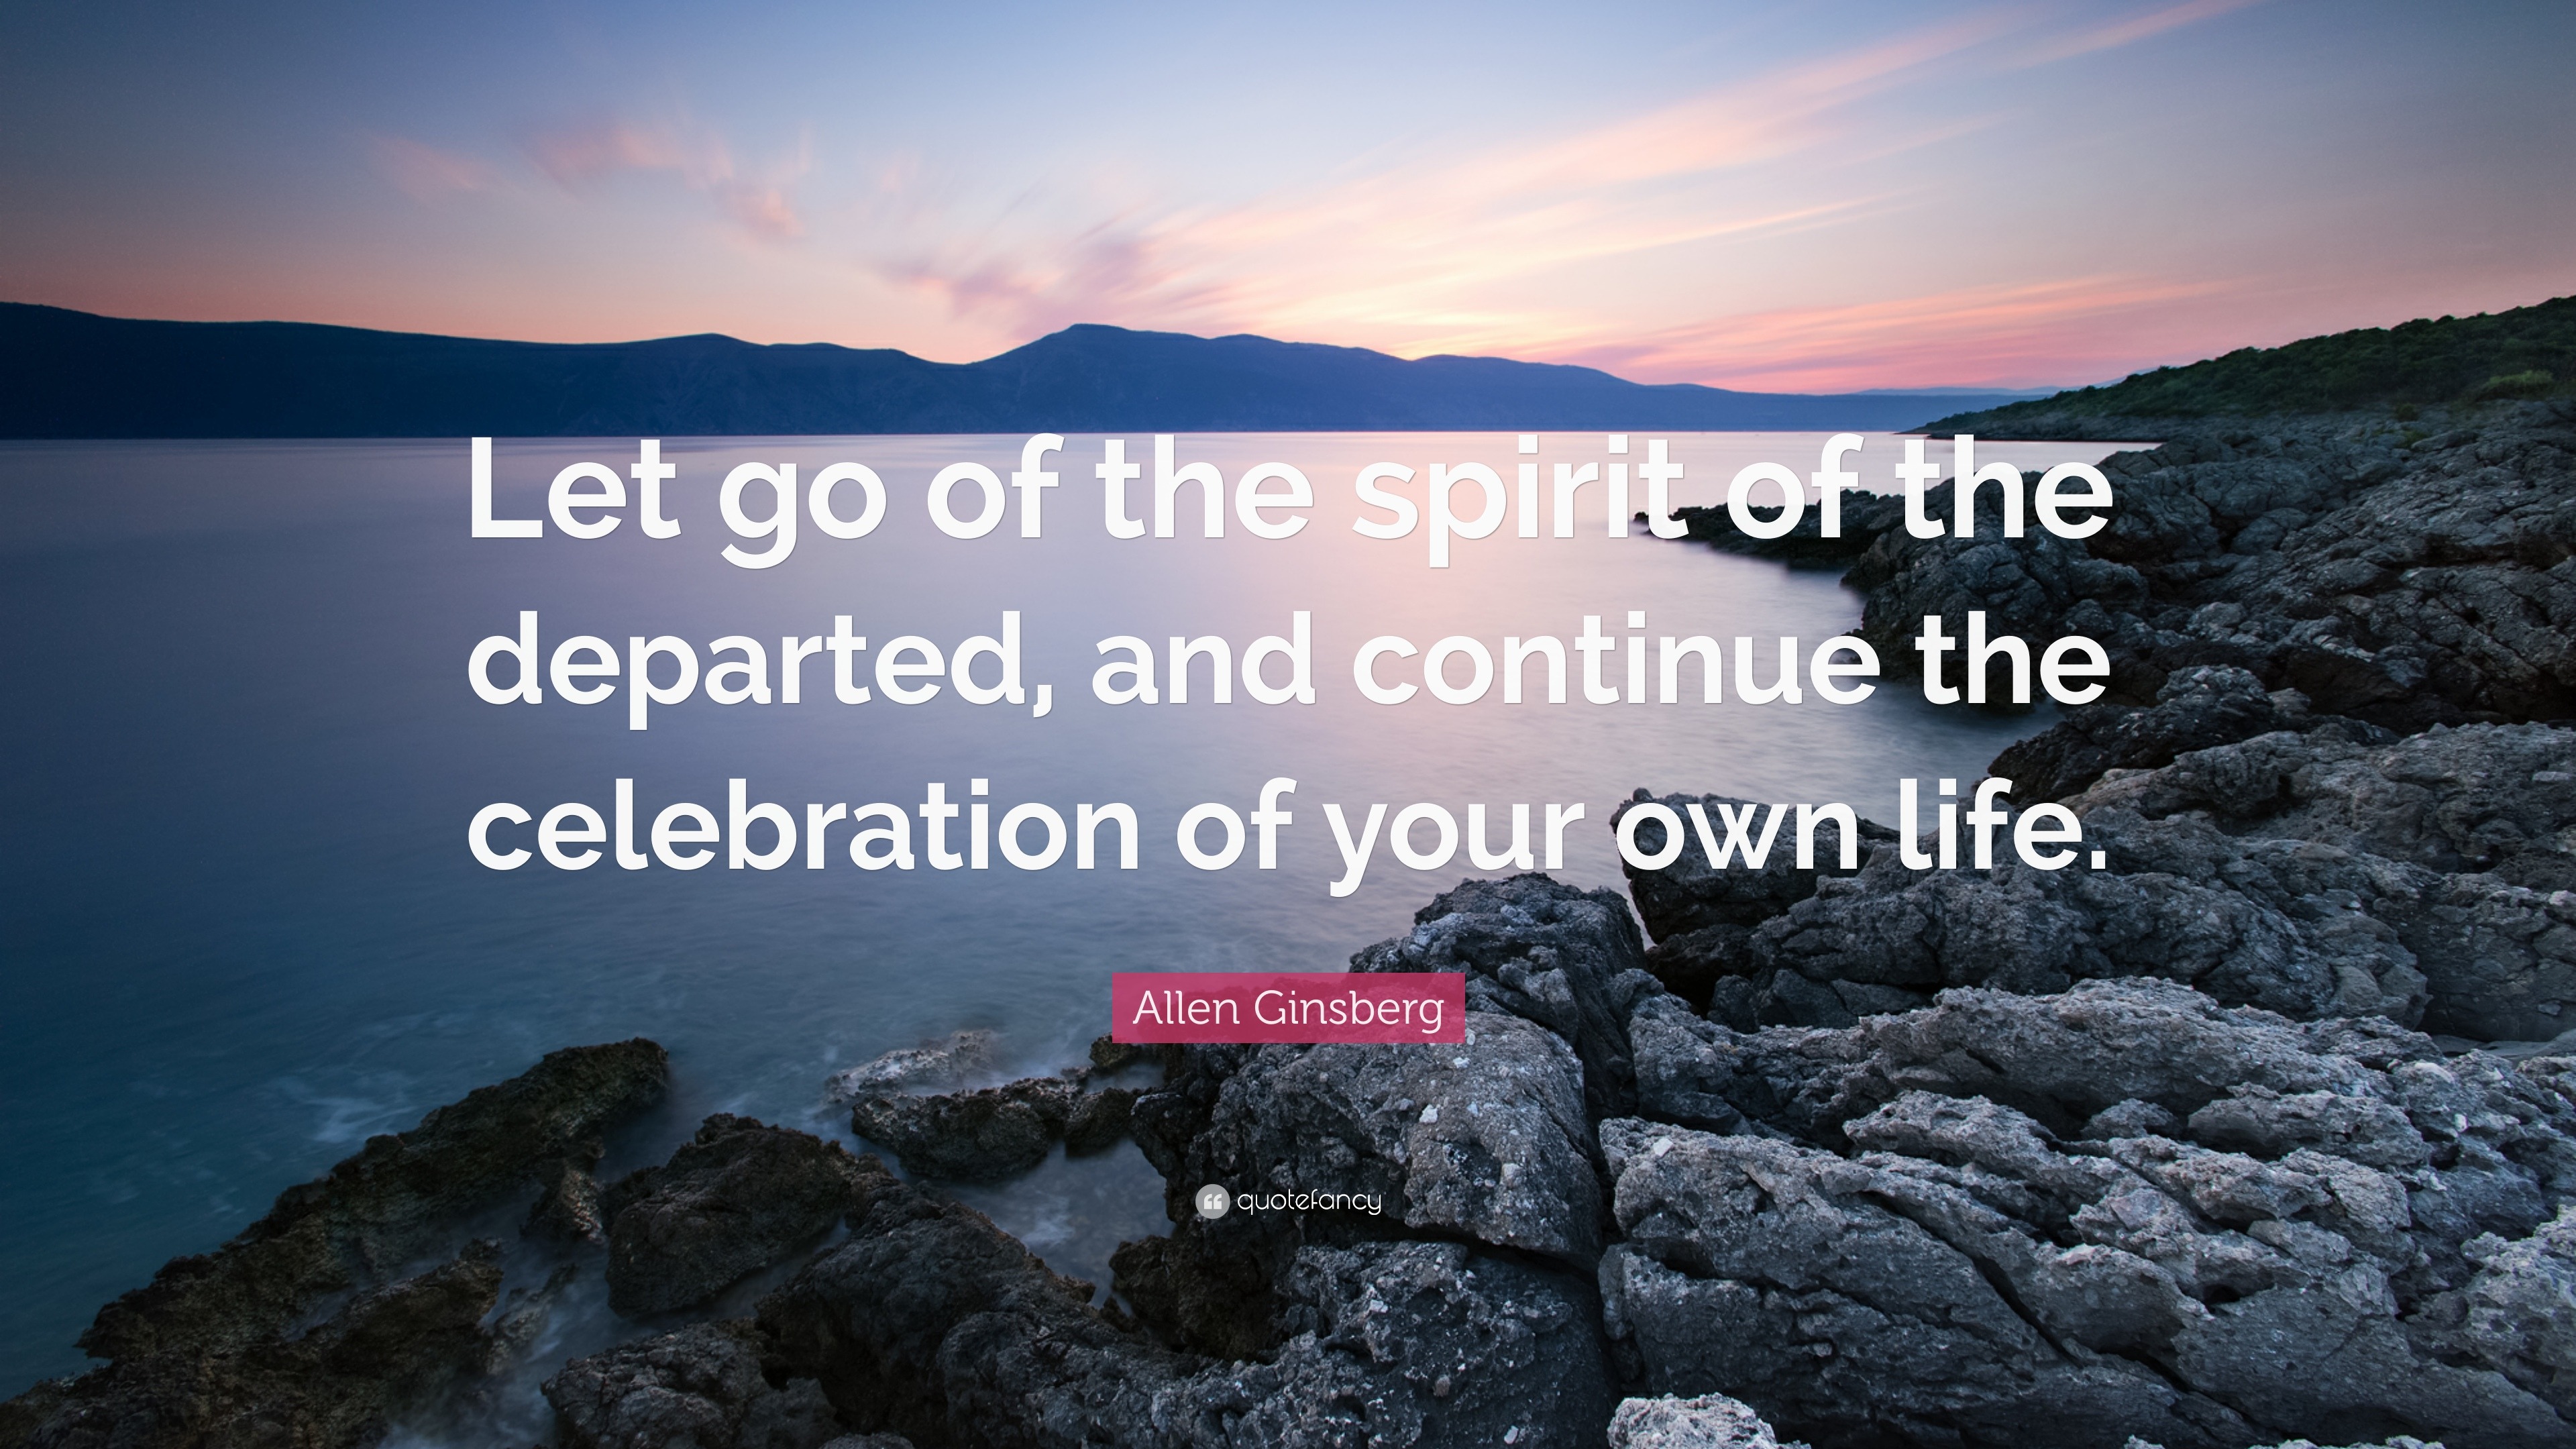 Allen Ginsberg Quote: “Let go of the spirit of the departed, and continue  the celebration of